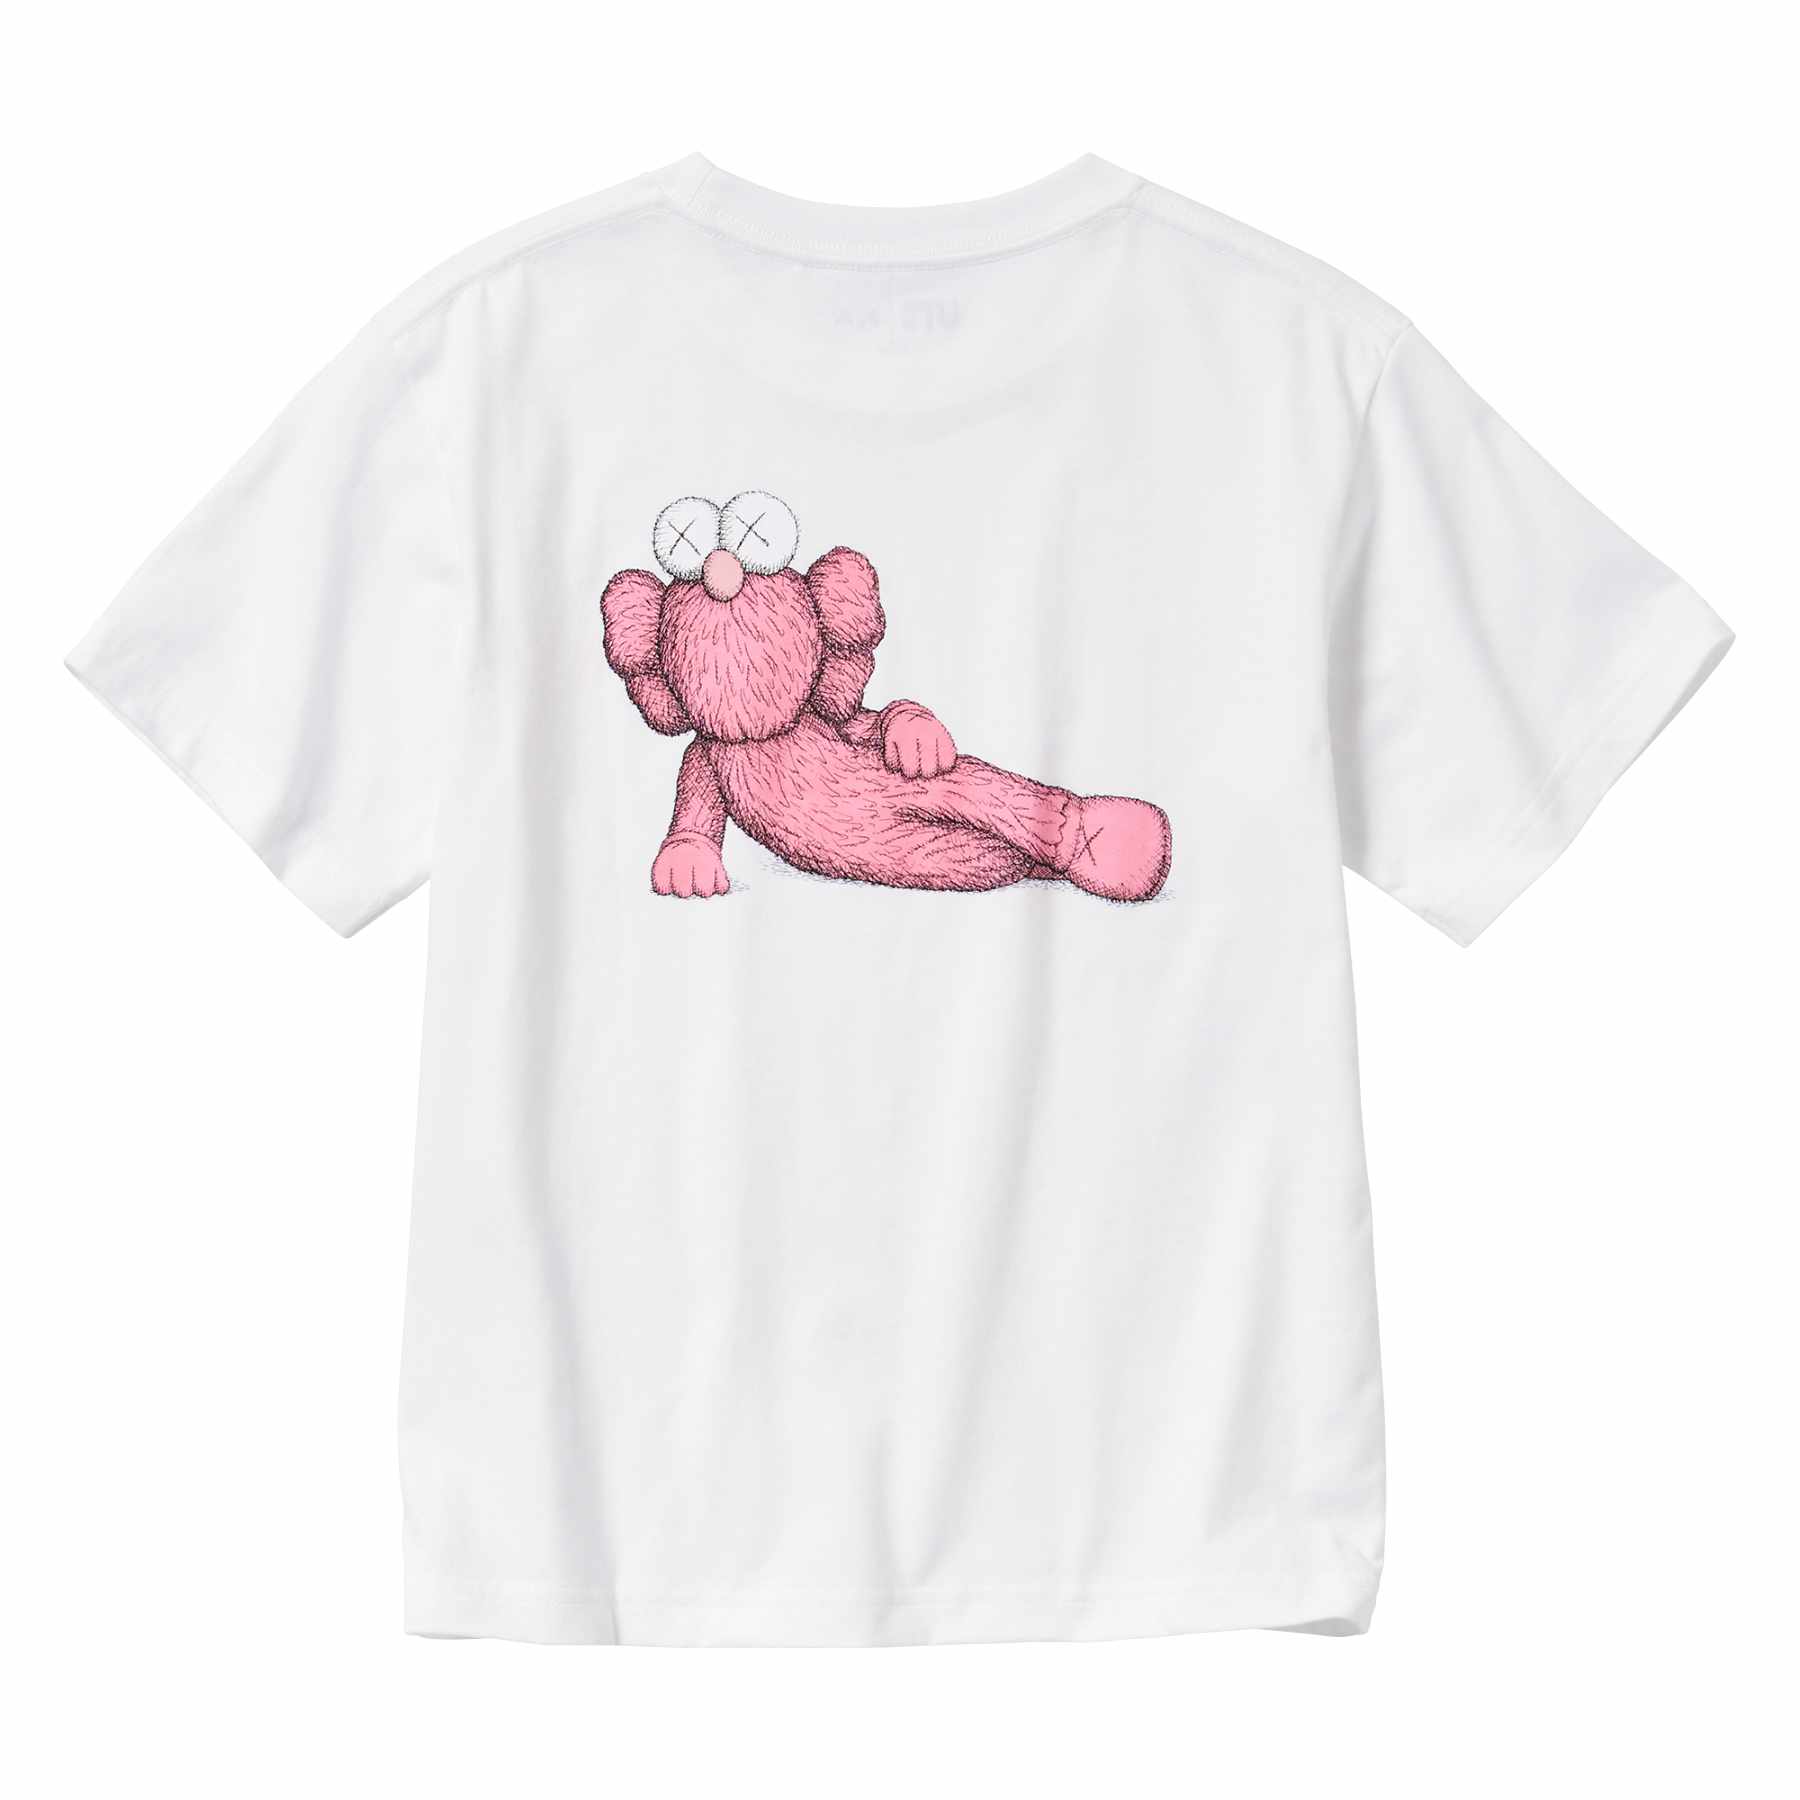 A white KAWS x UNIQLO T-shirt printed with a 'What Party" artwork